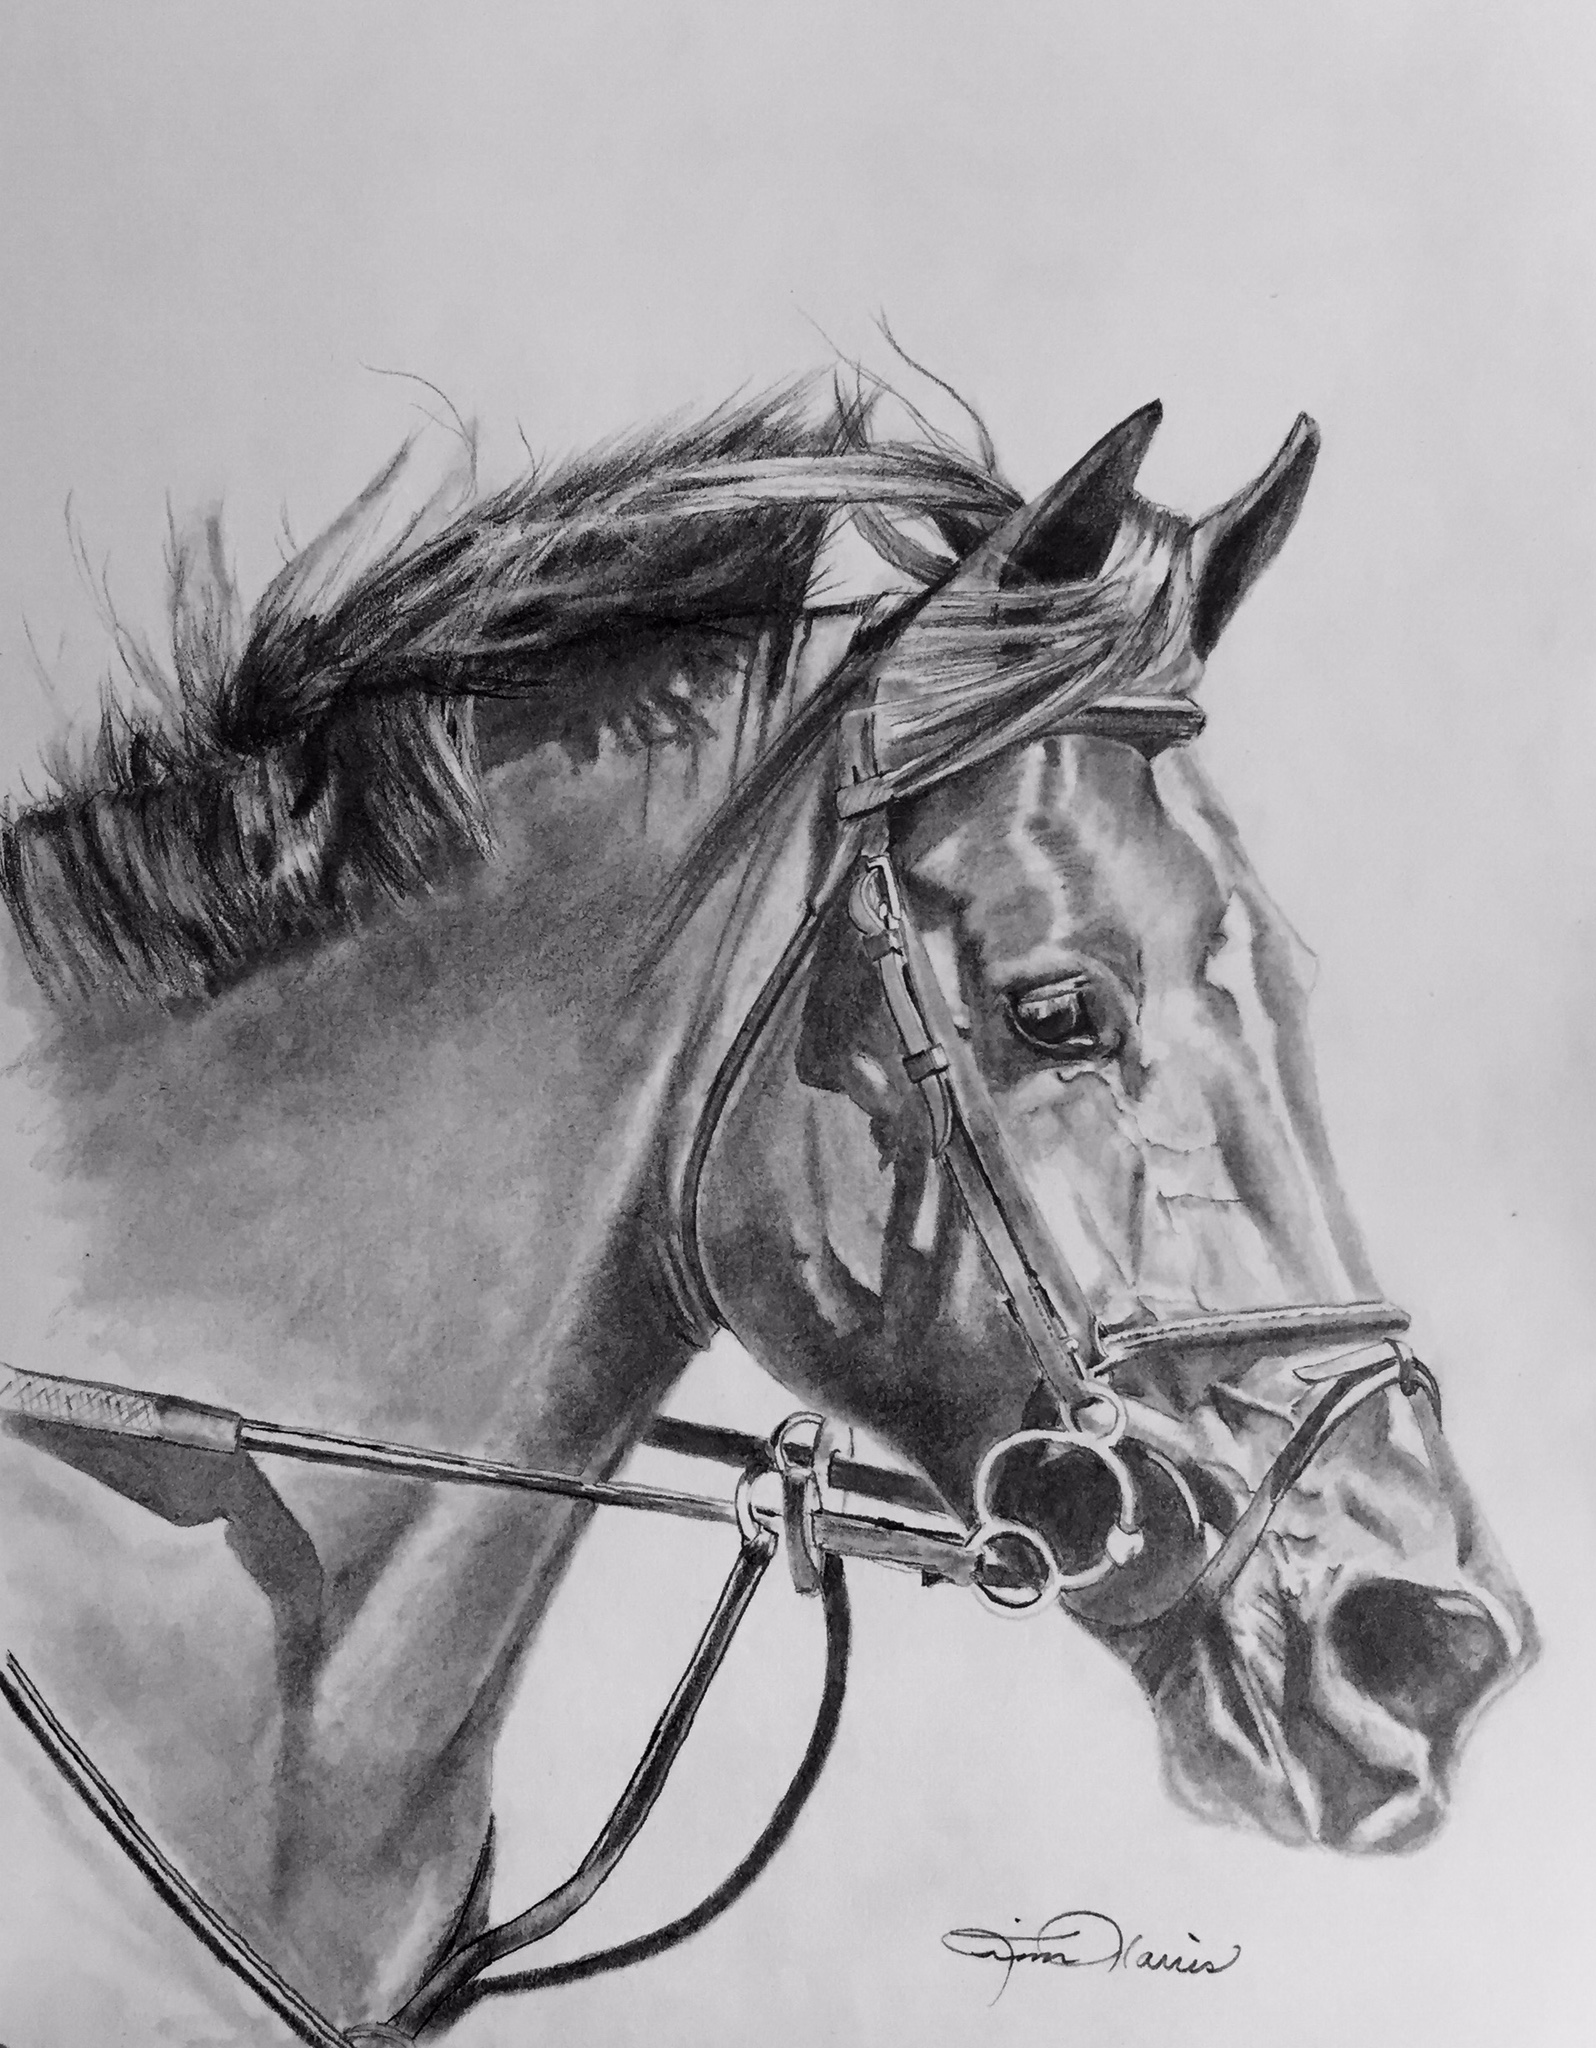 Custom graphite drawings of any discipline will be created for you and ready for framing